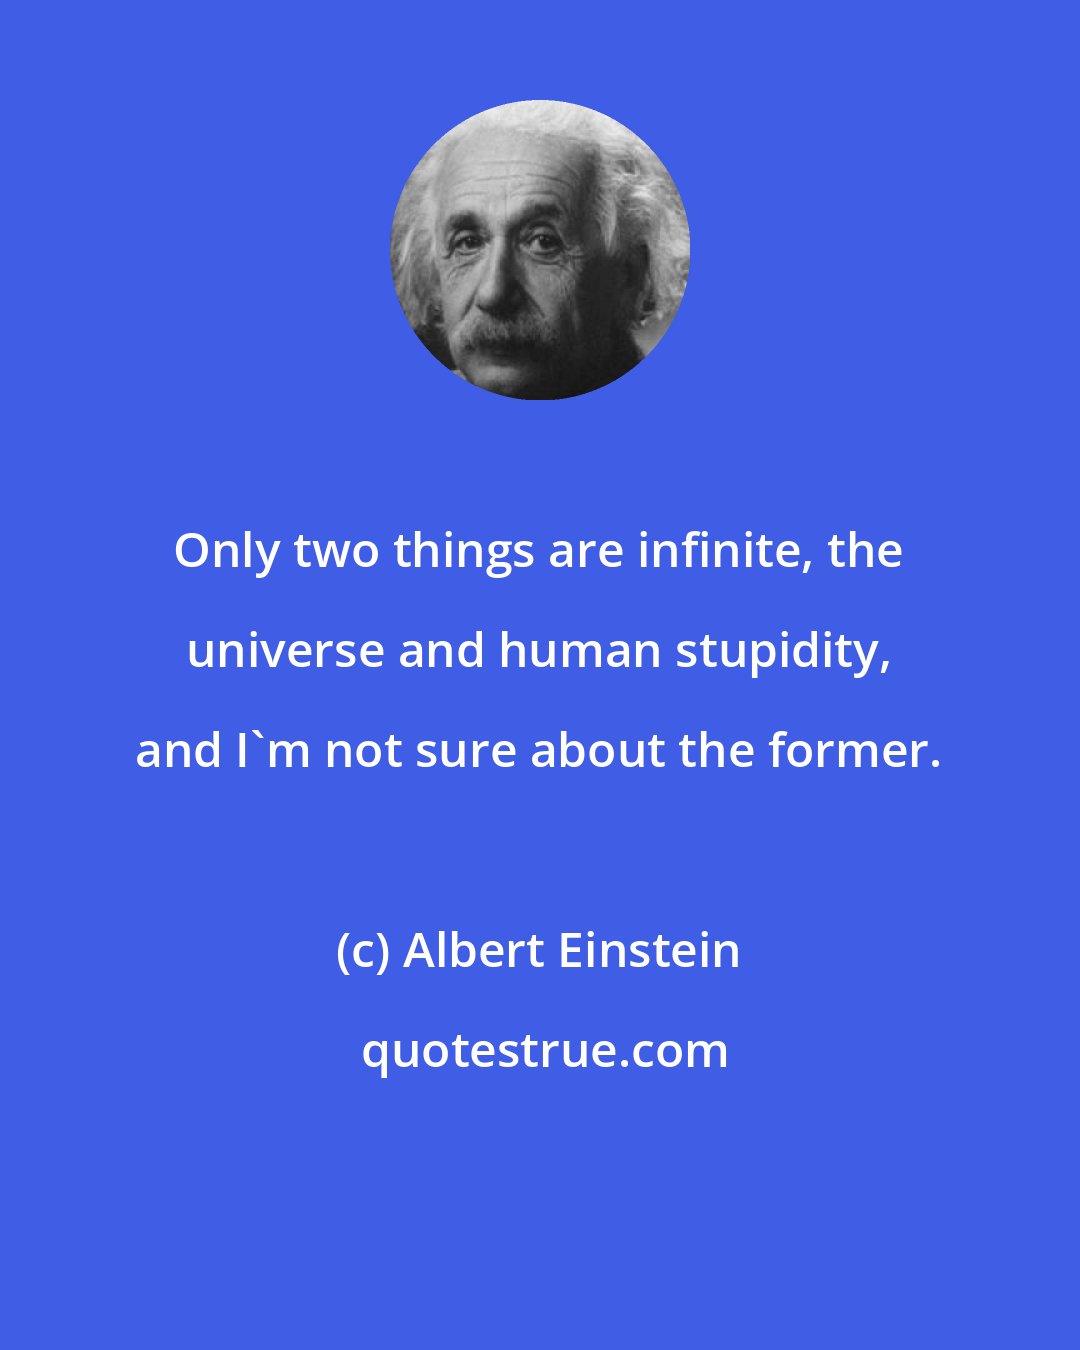 Albert Einstein: Only two things are infinite, the universe and human stupidity, and I'm not sure about the former.